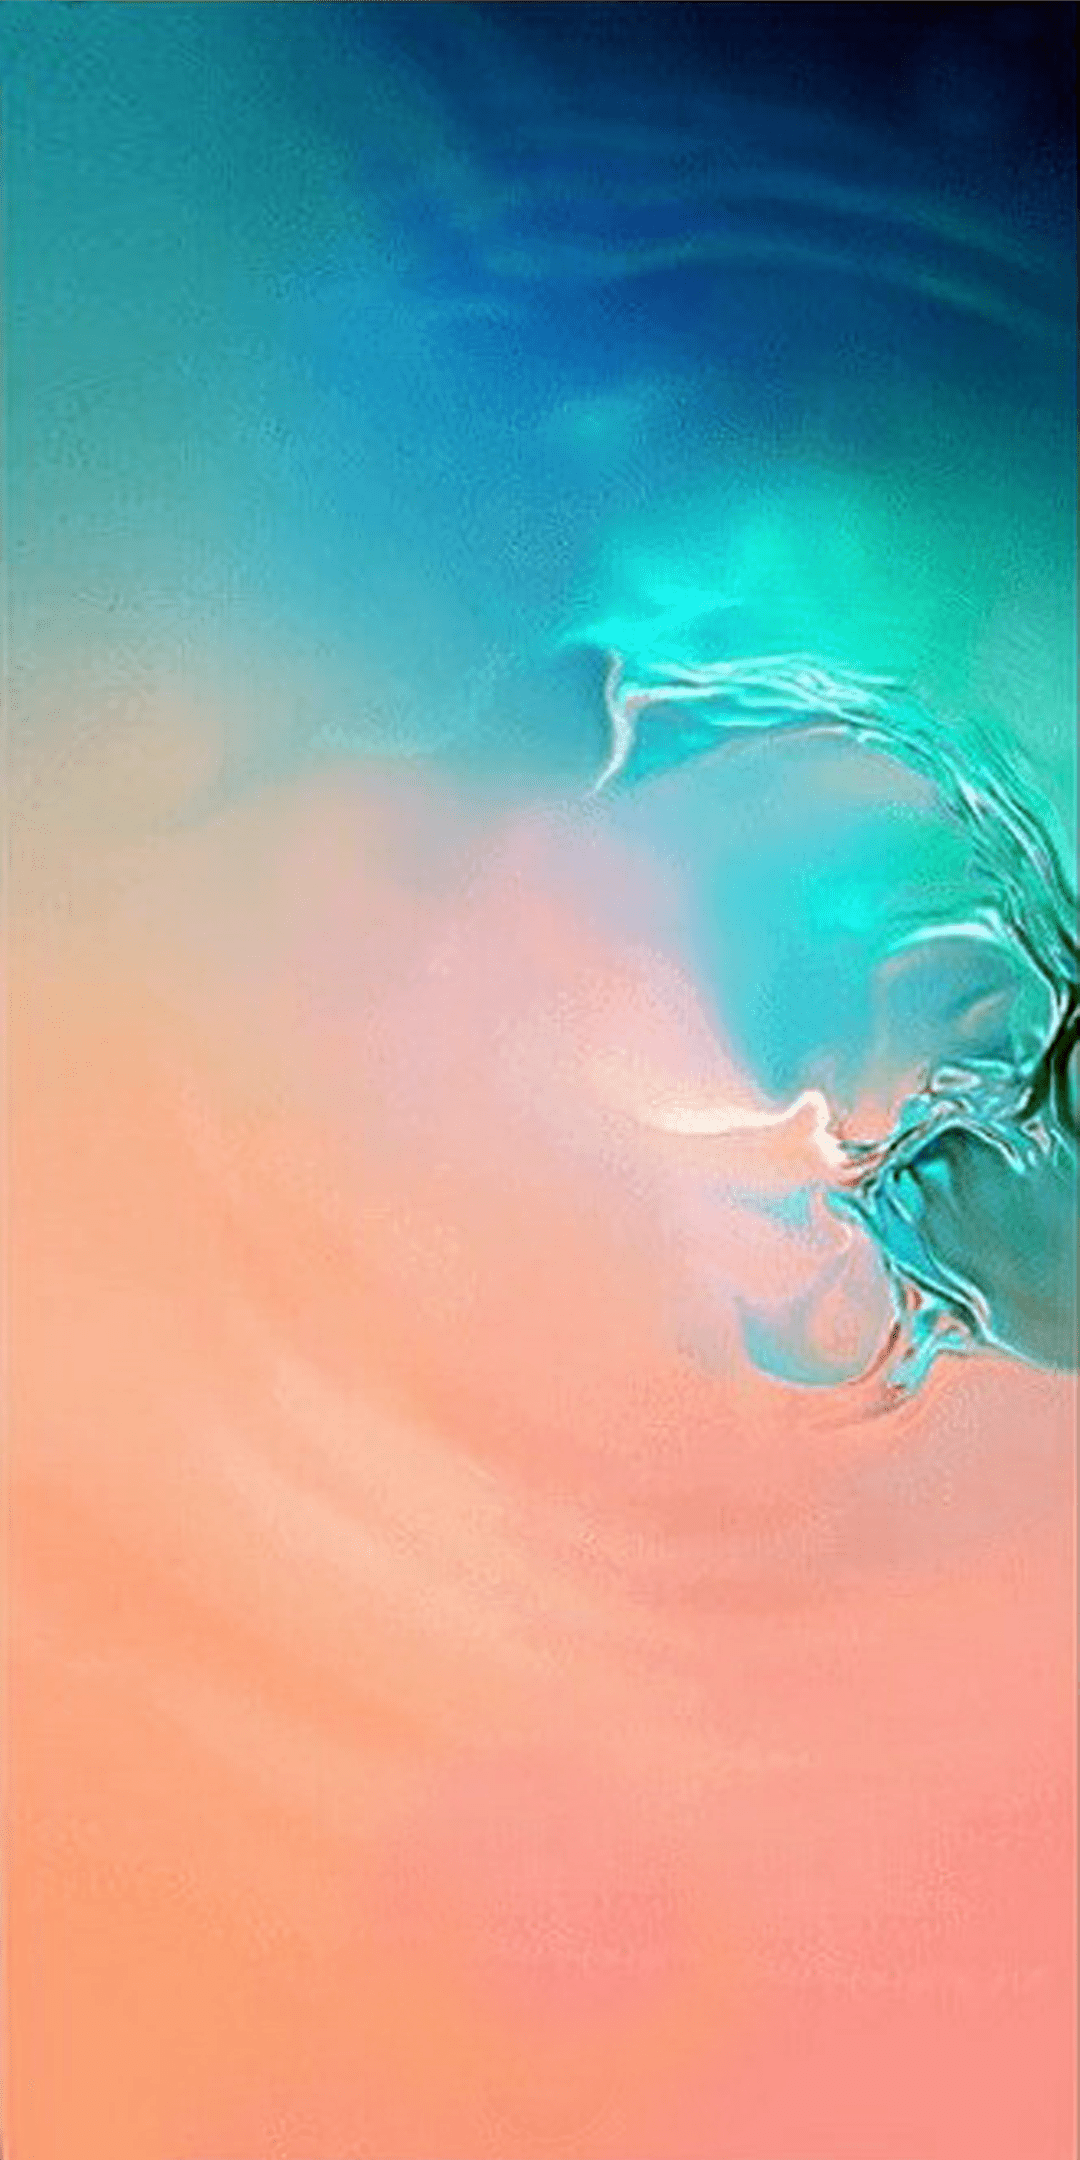 Galaxy S10 Stock Wallpapers